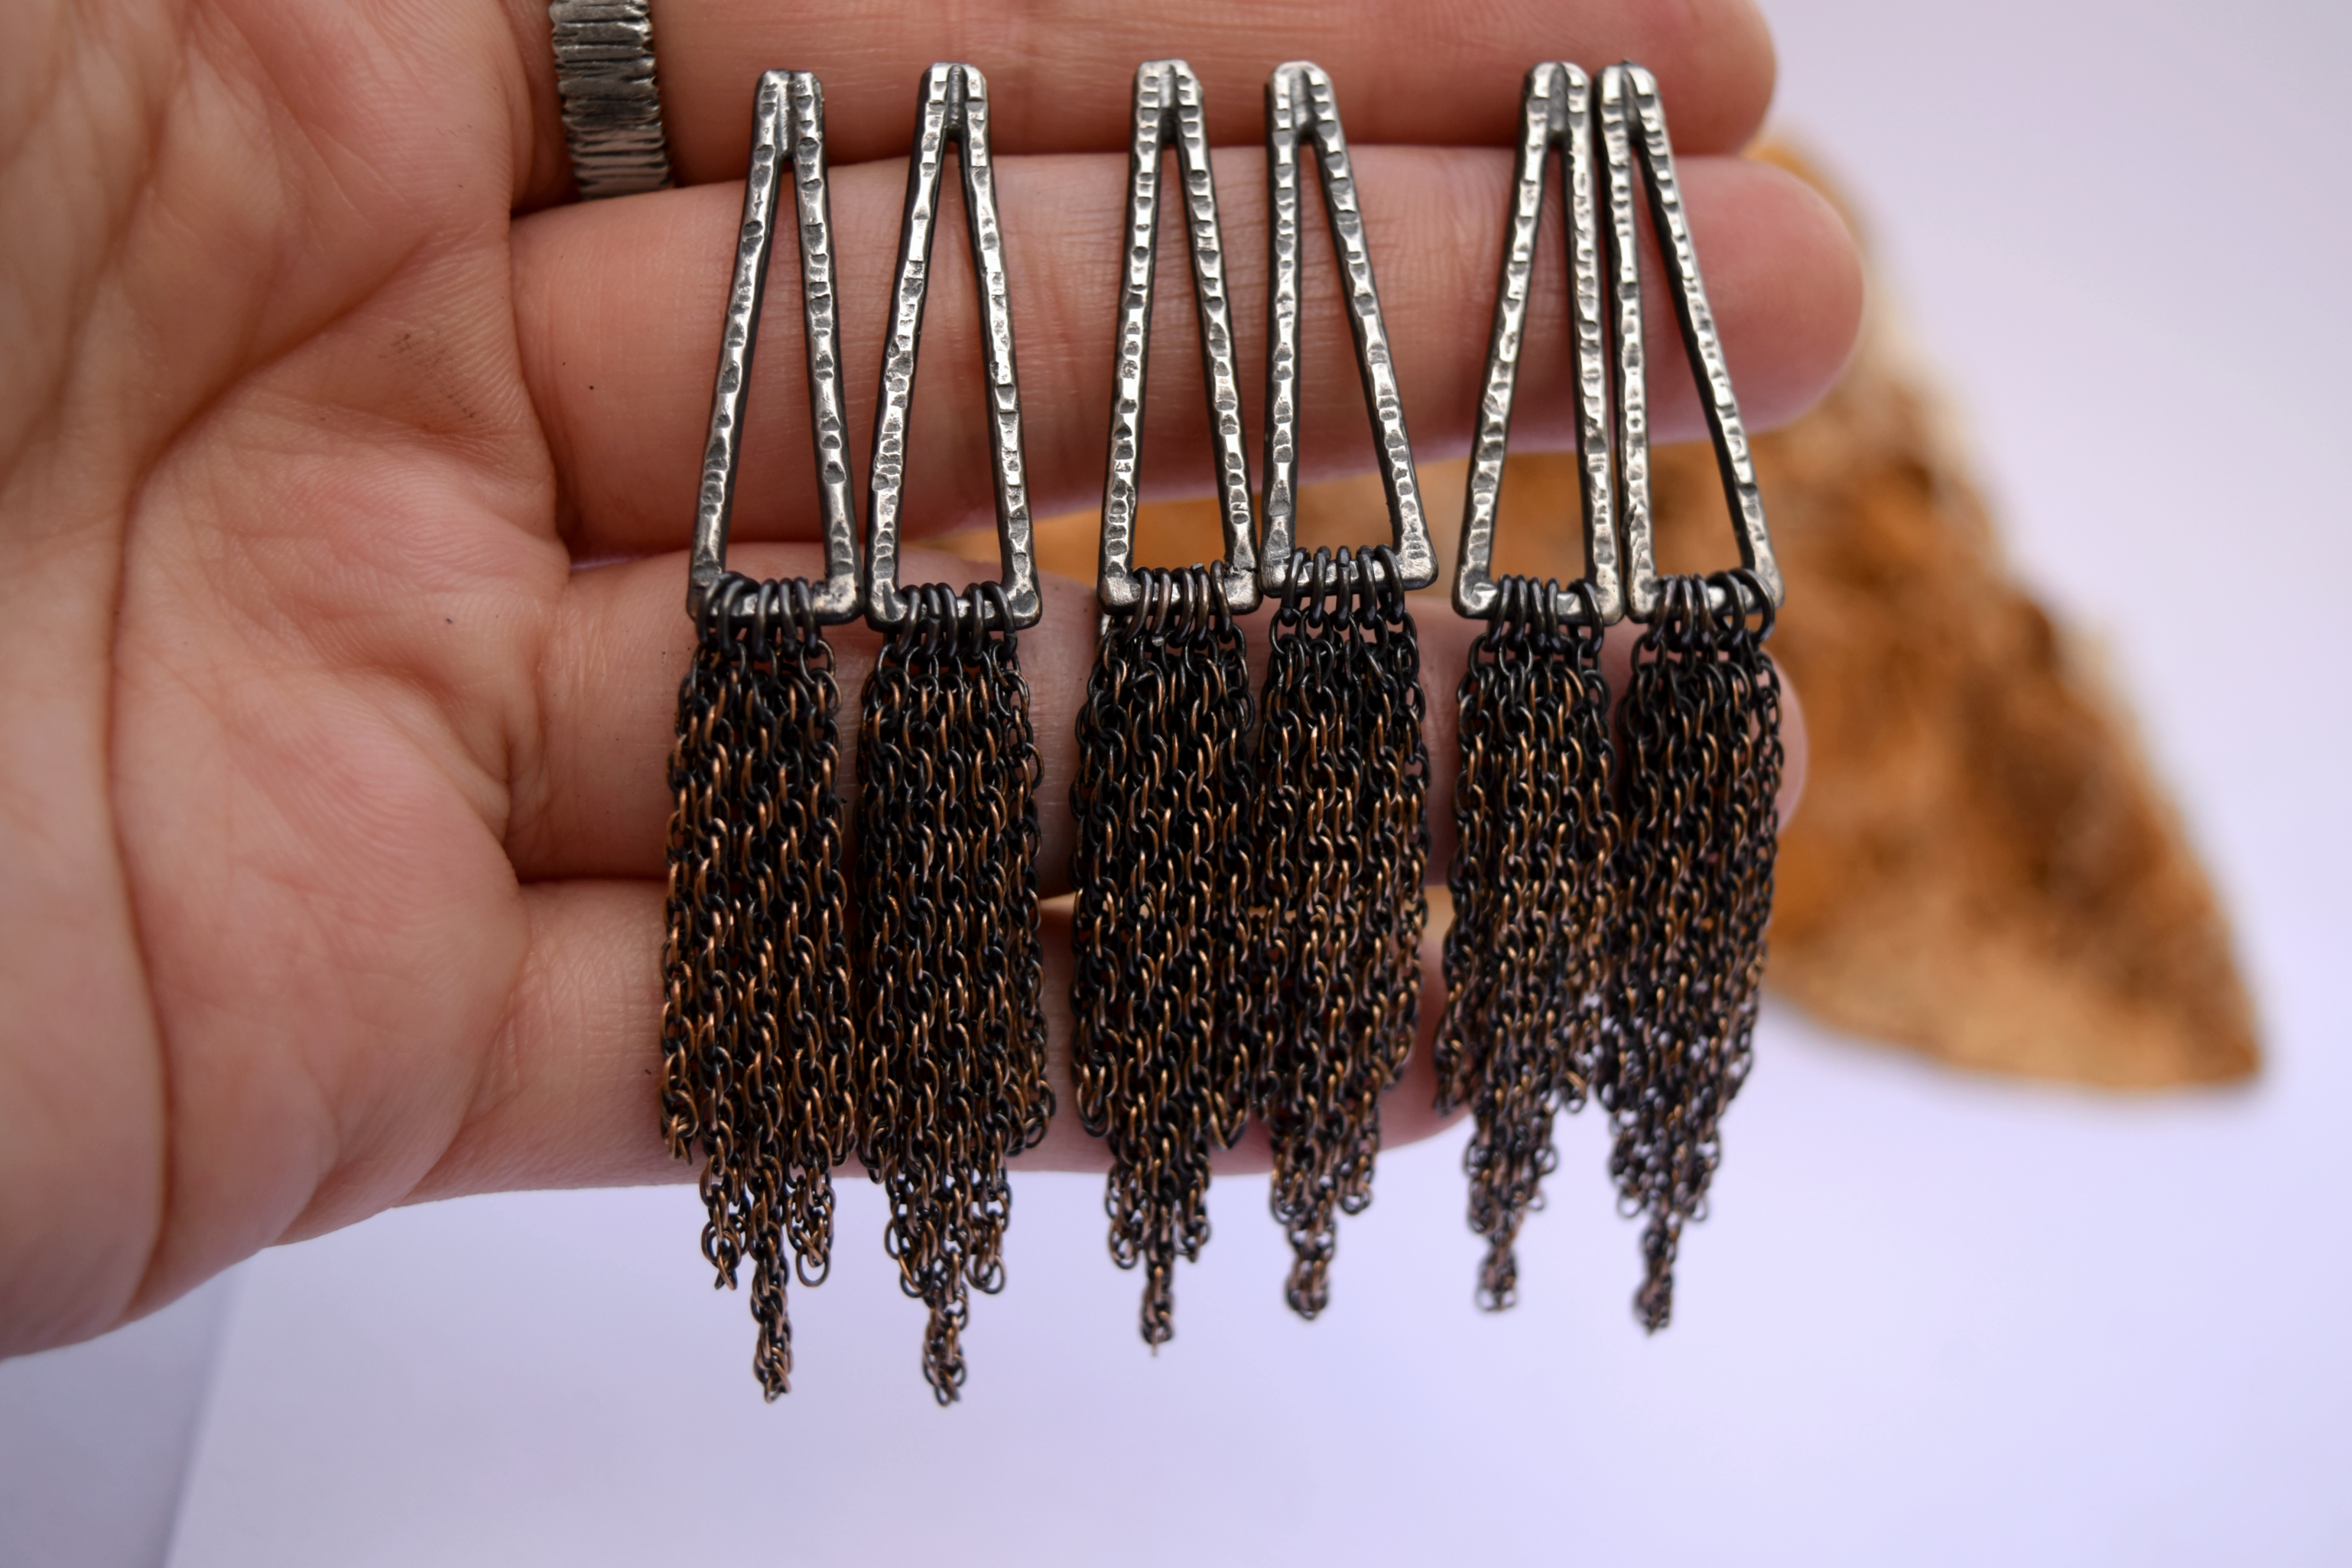 XHollow Armor Dangle Earrings - Silver and Bronze - Chain Dangles - Spike Dangles - Armor Dangles  - Post Dangles - Armor - Dangle Earrings